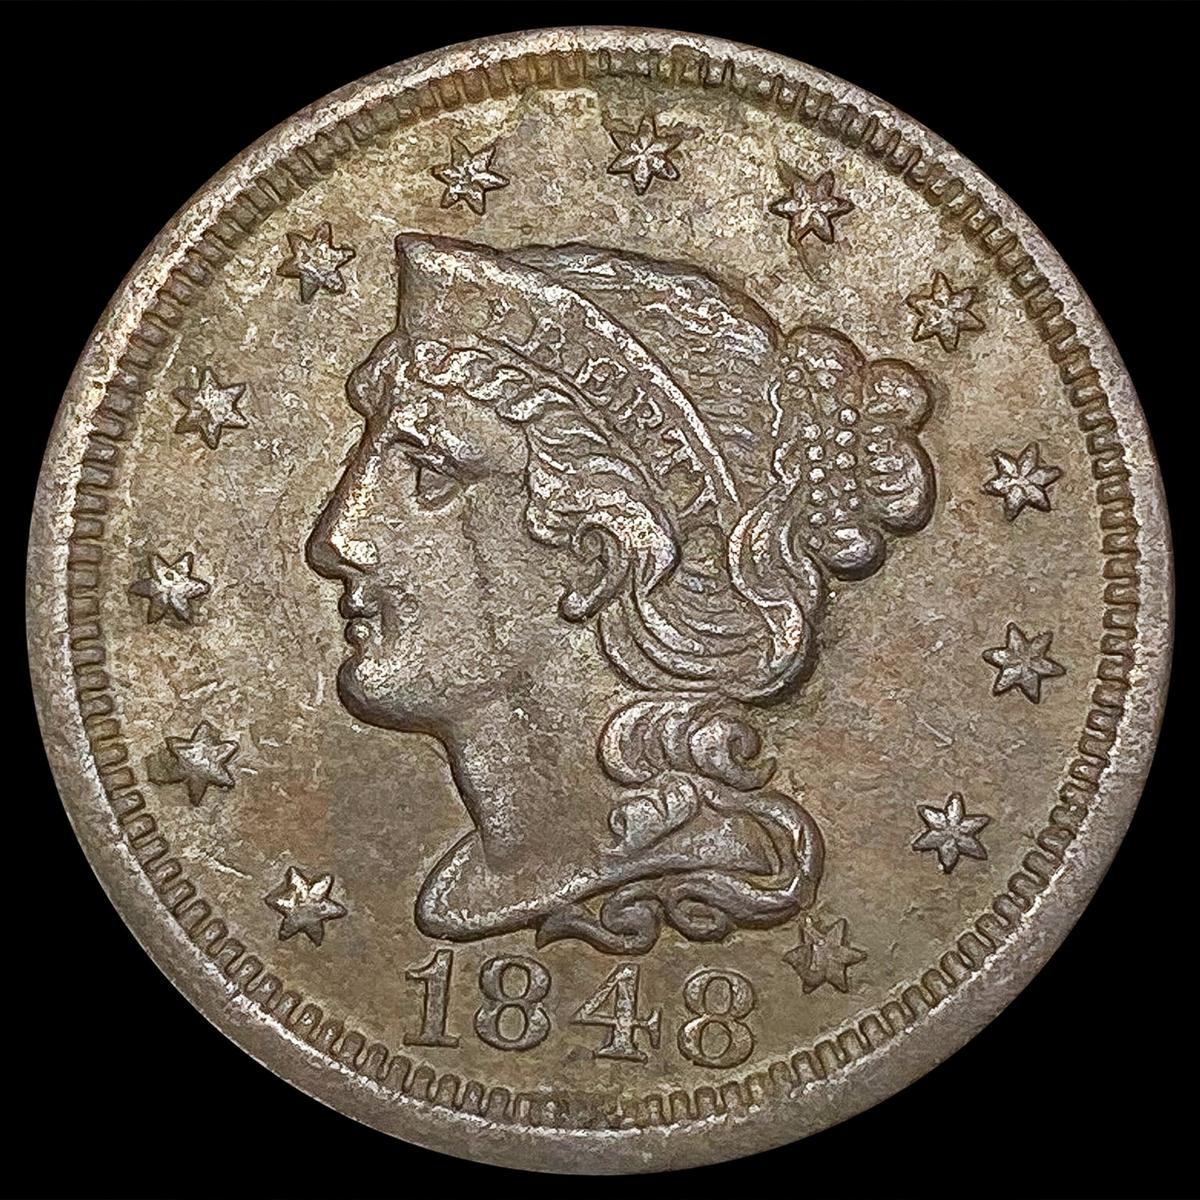 1848 Braided Hair Large Cent UNCIRCULATED